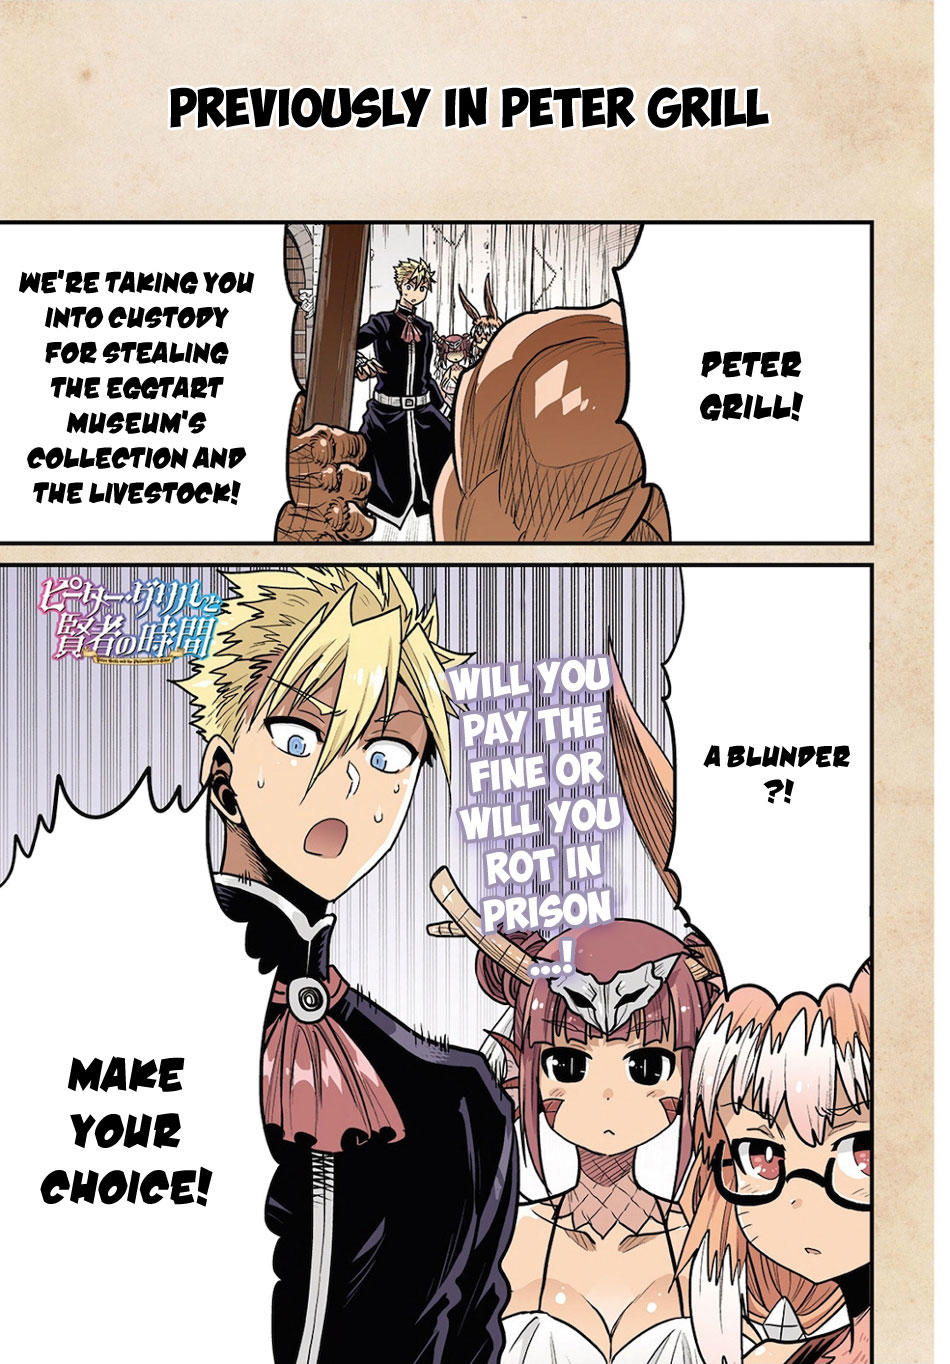 Read Peter Grill To Kenja No Jikan Vol.7 Chapter 34: Peter Grill And The  One Who Makes Importance Of Virginity - Manganelo